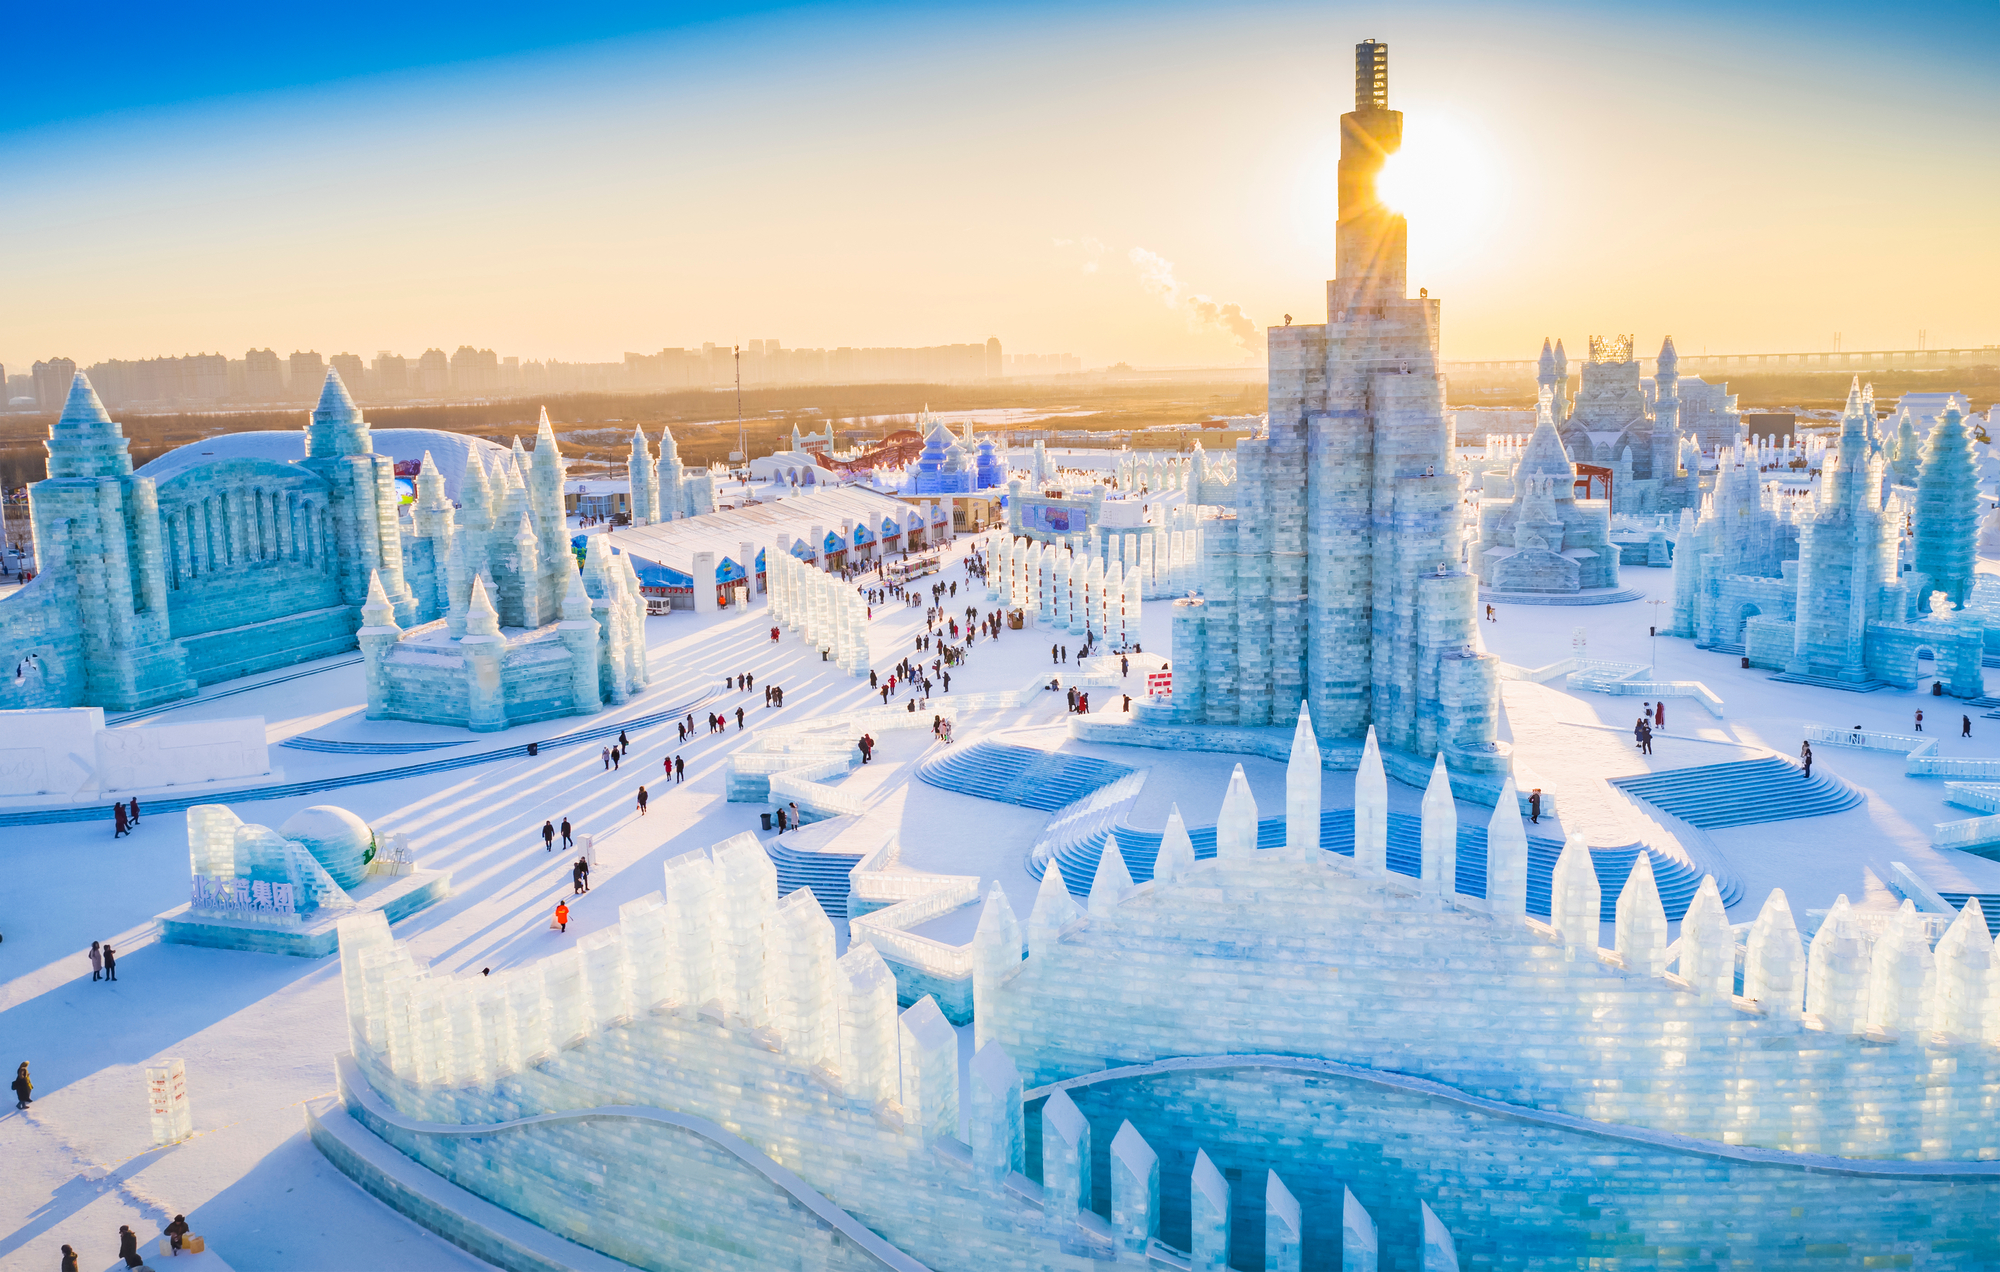 Wonder in Harbin's Ice and Snow Wonderland | Expats Holidays